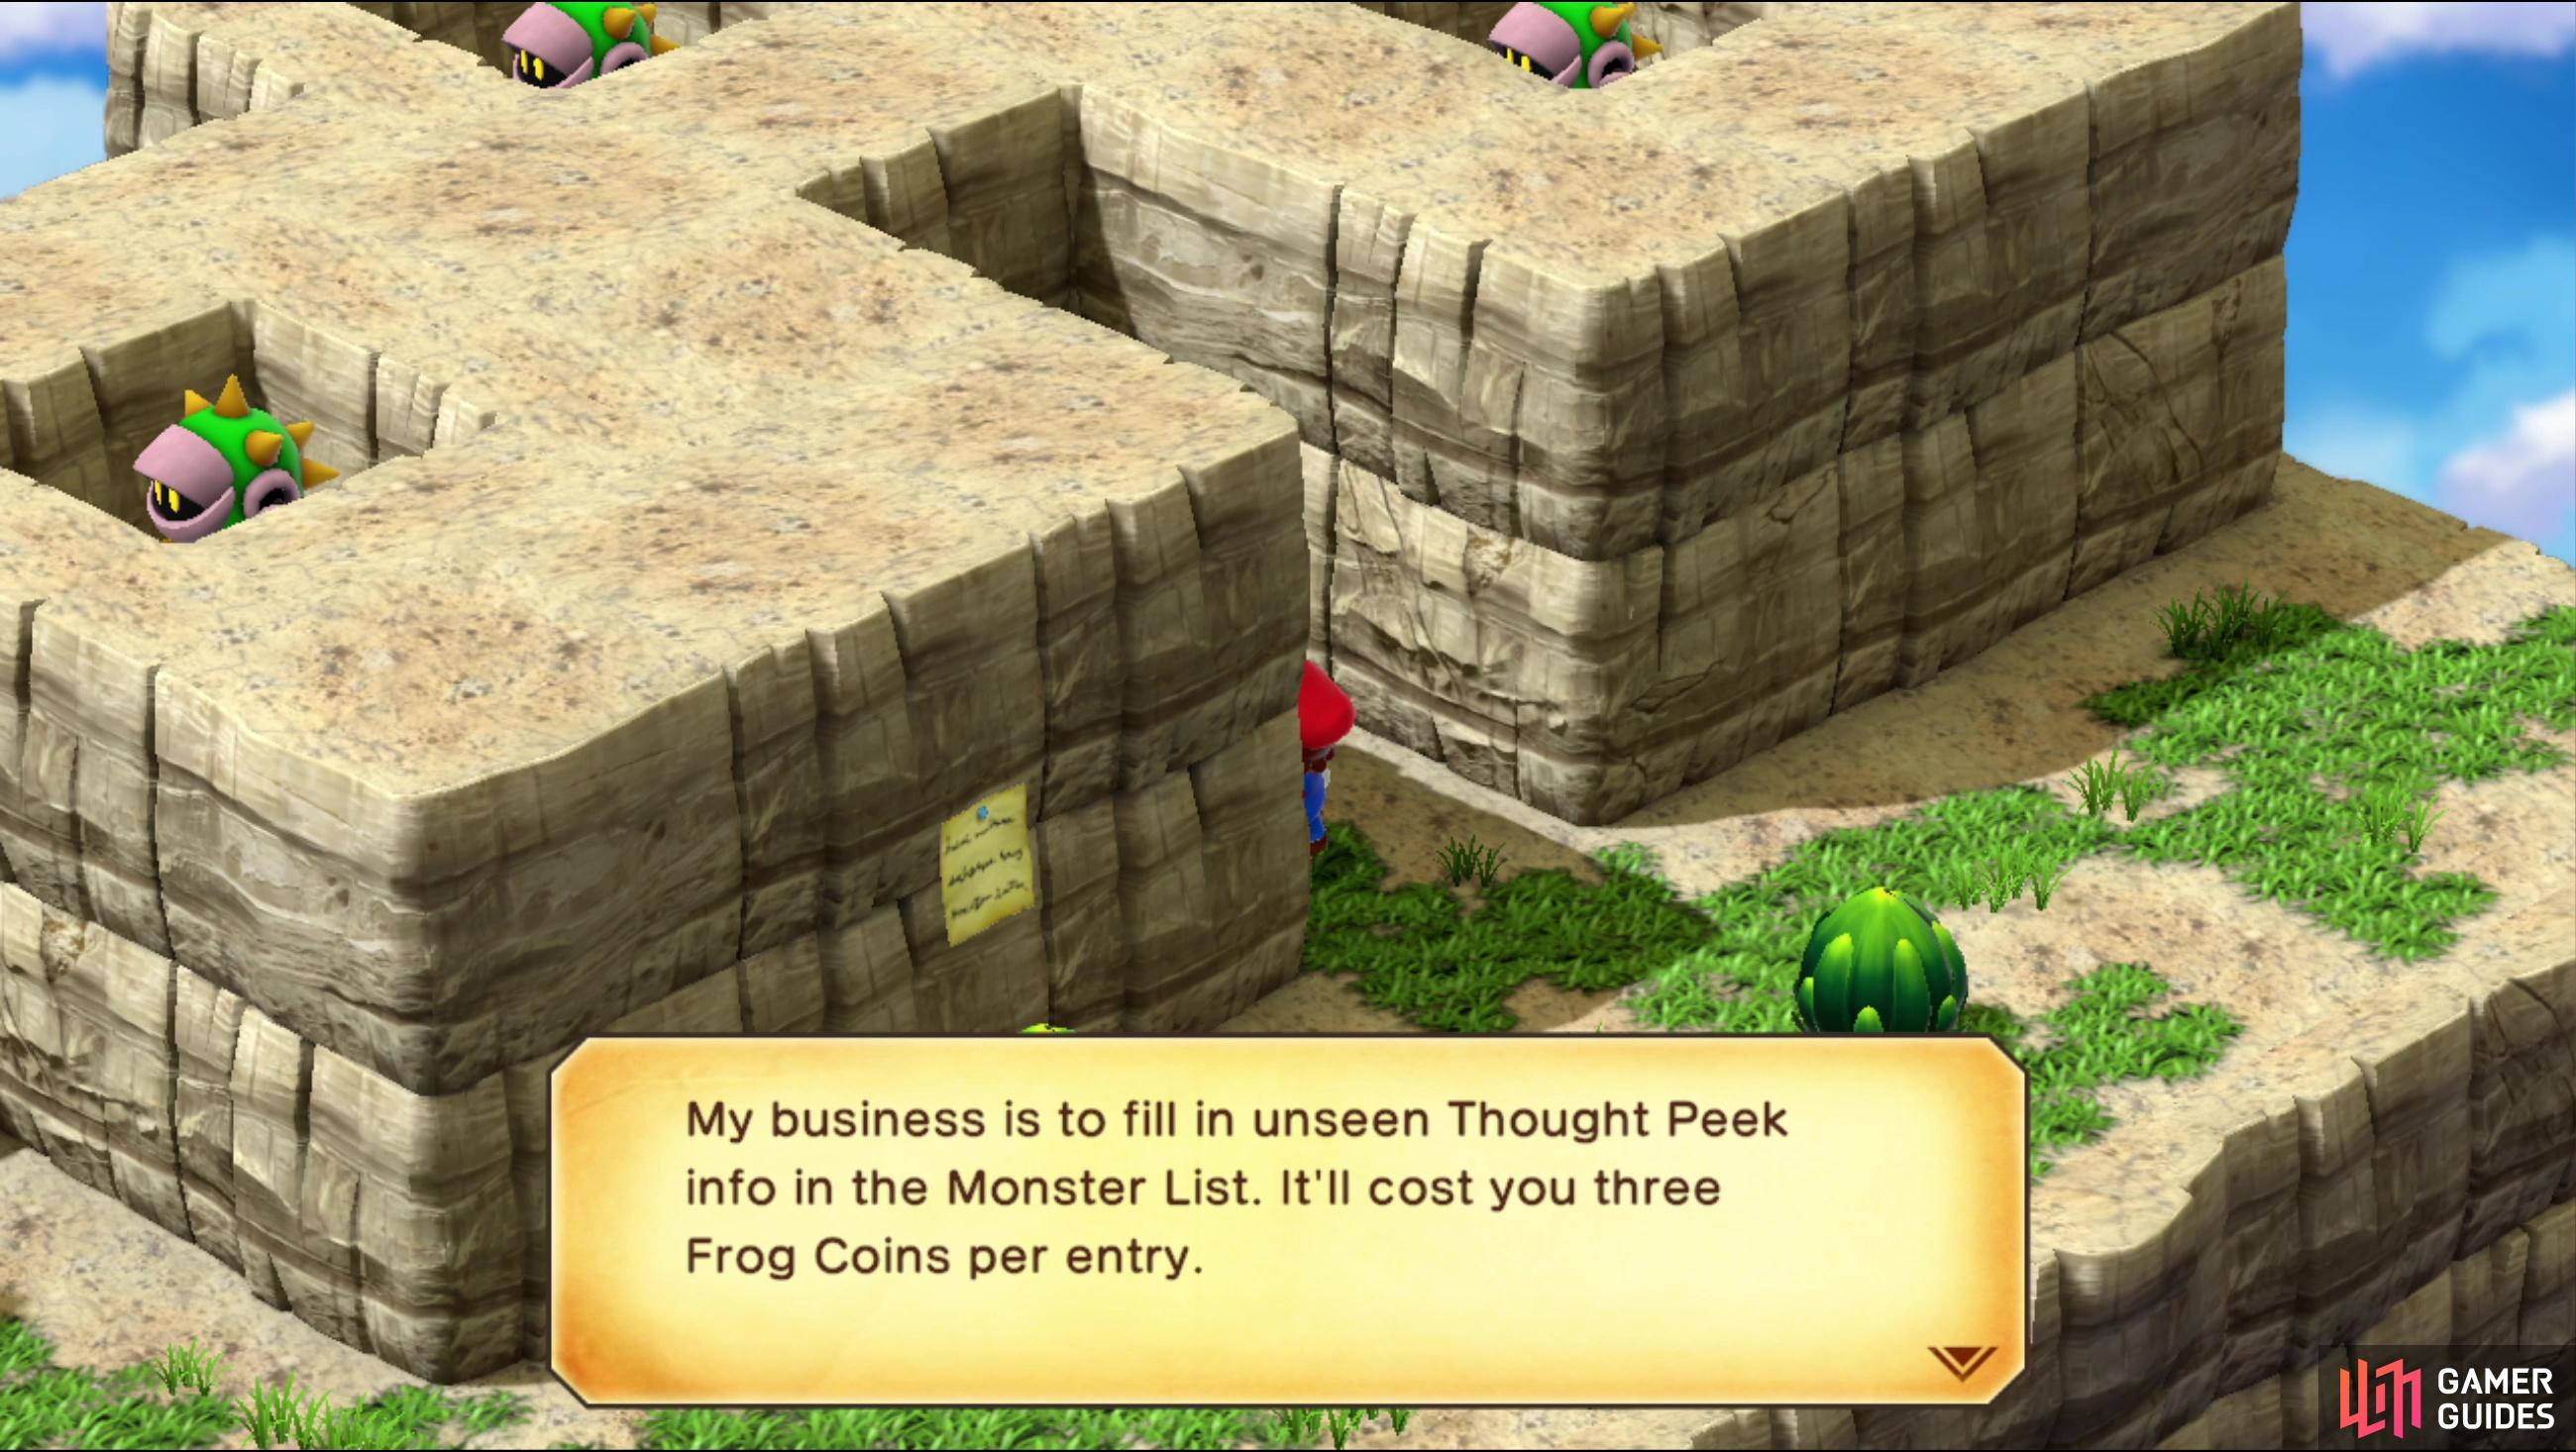 Talk to a hidden character who will offer to fill out your Monster List in exchange for Frog Coins,